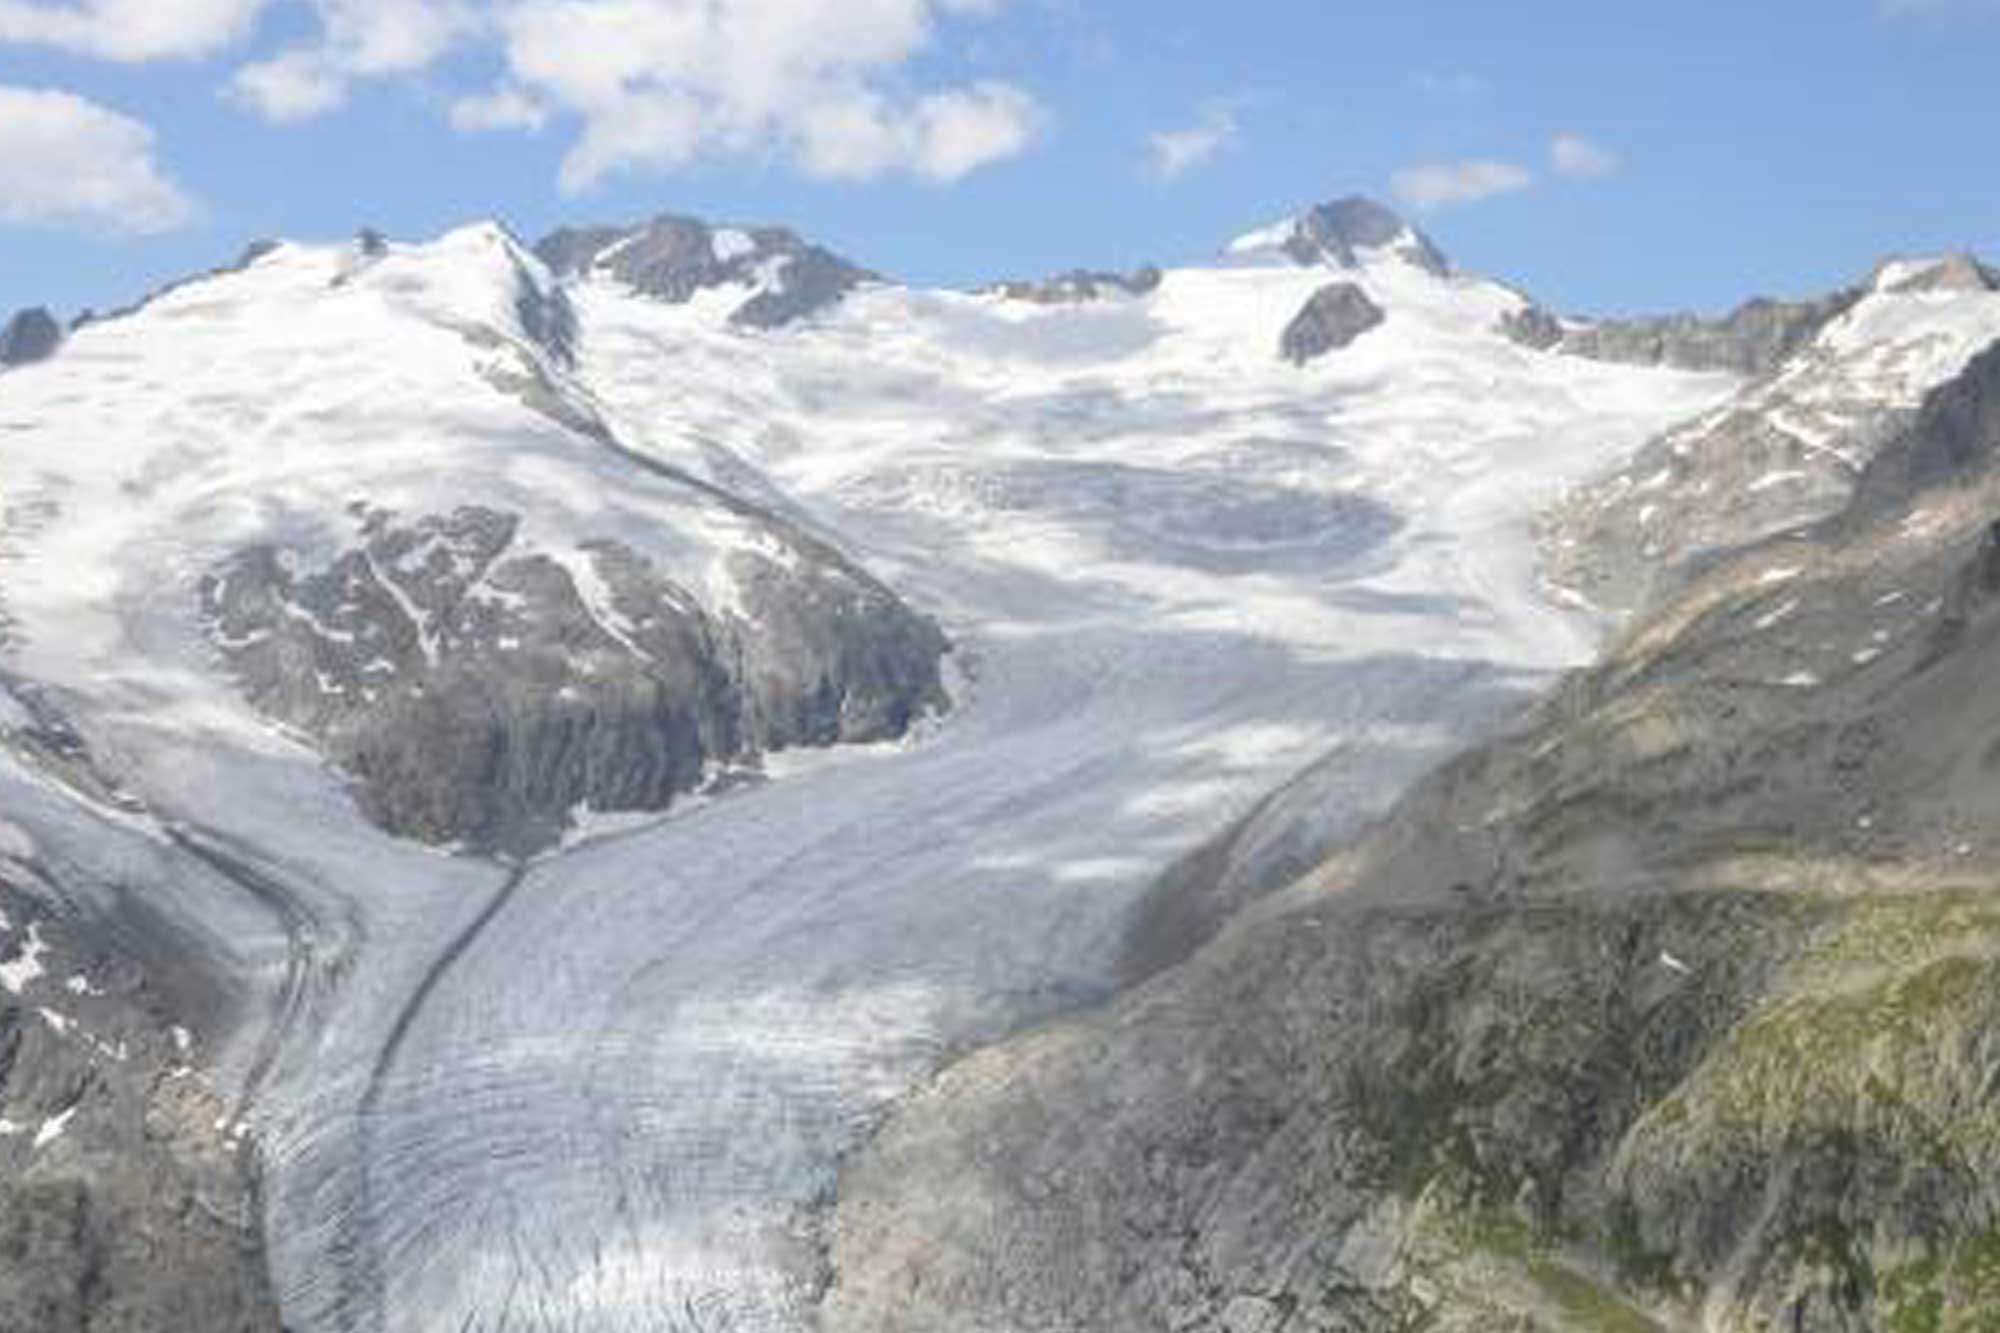 Aerial view of glacier that is melting down mountains.